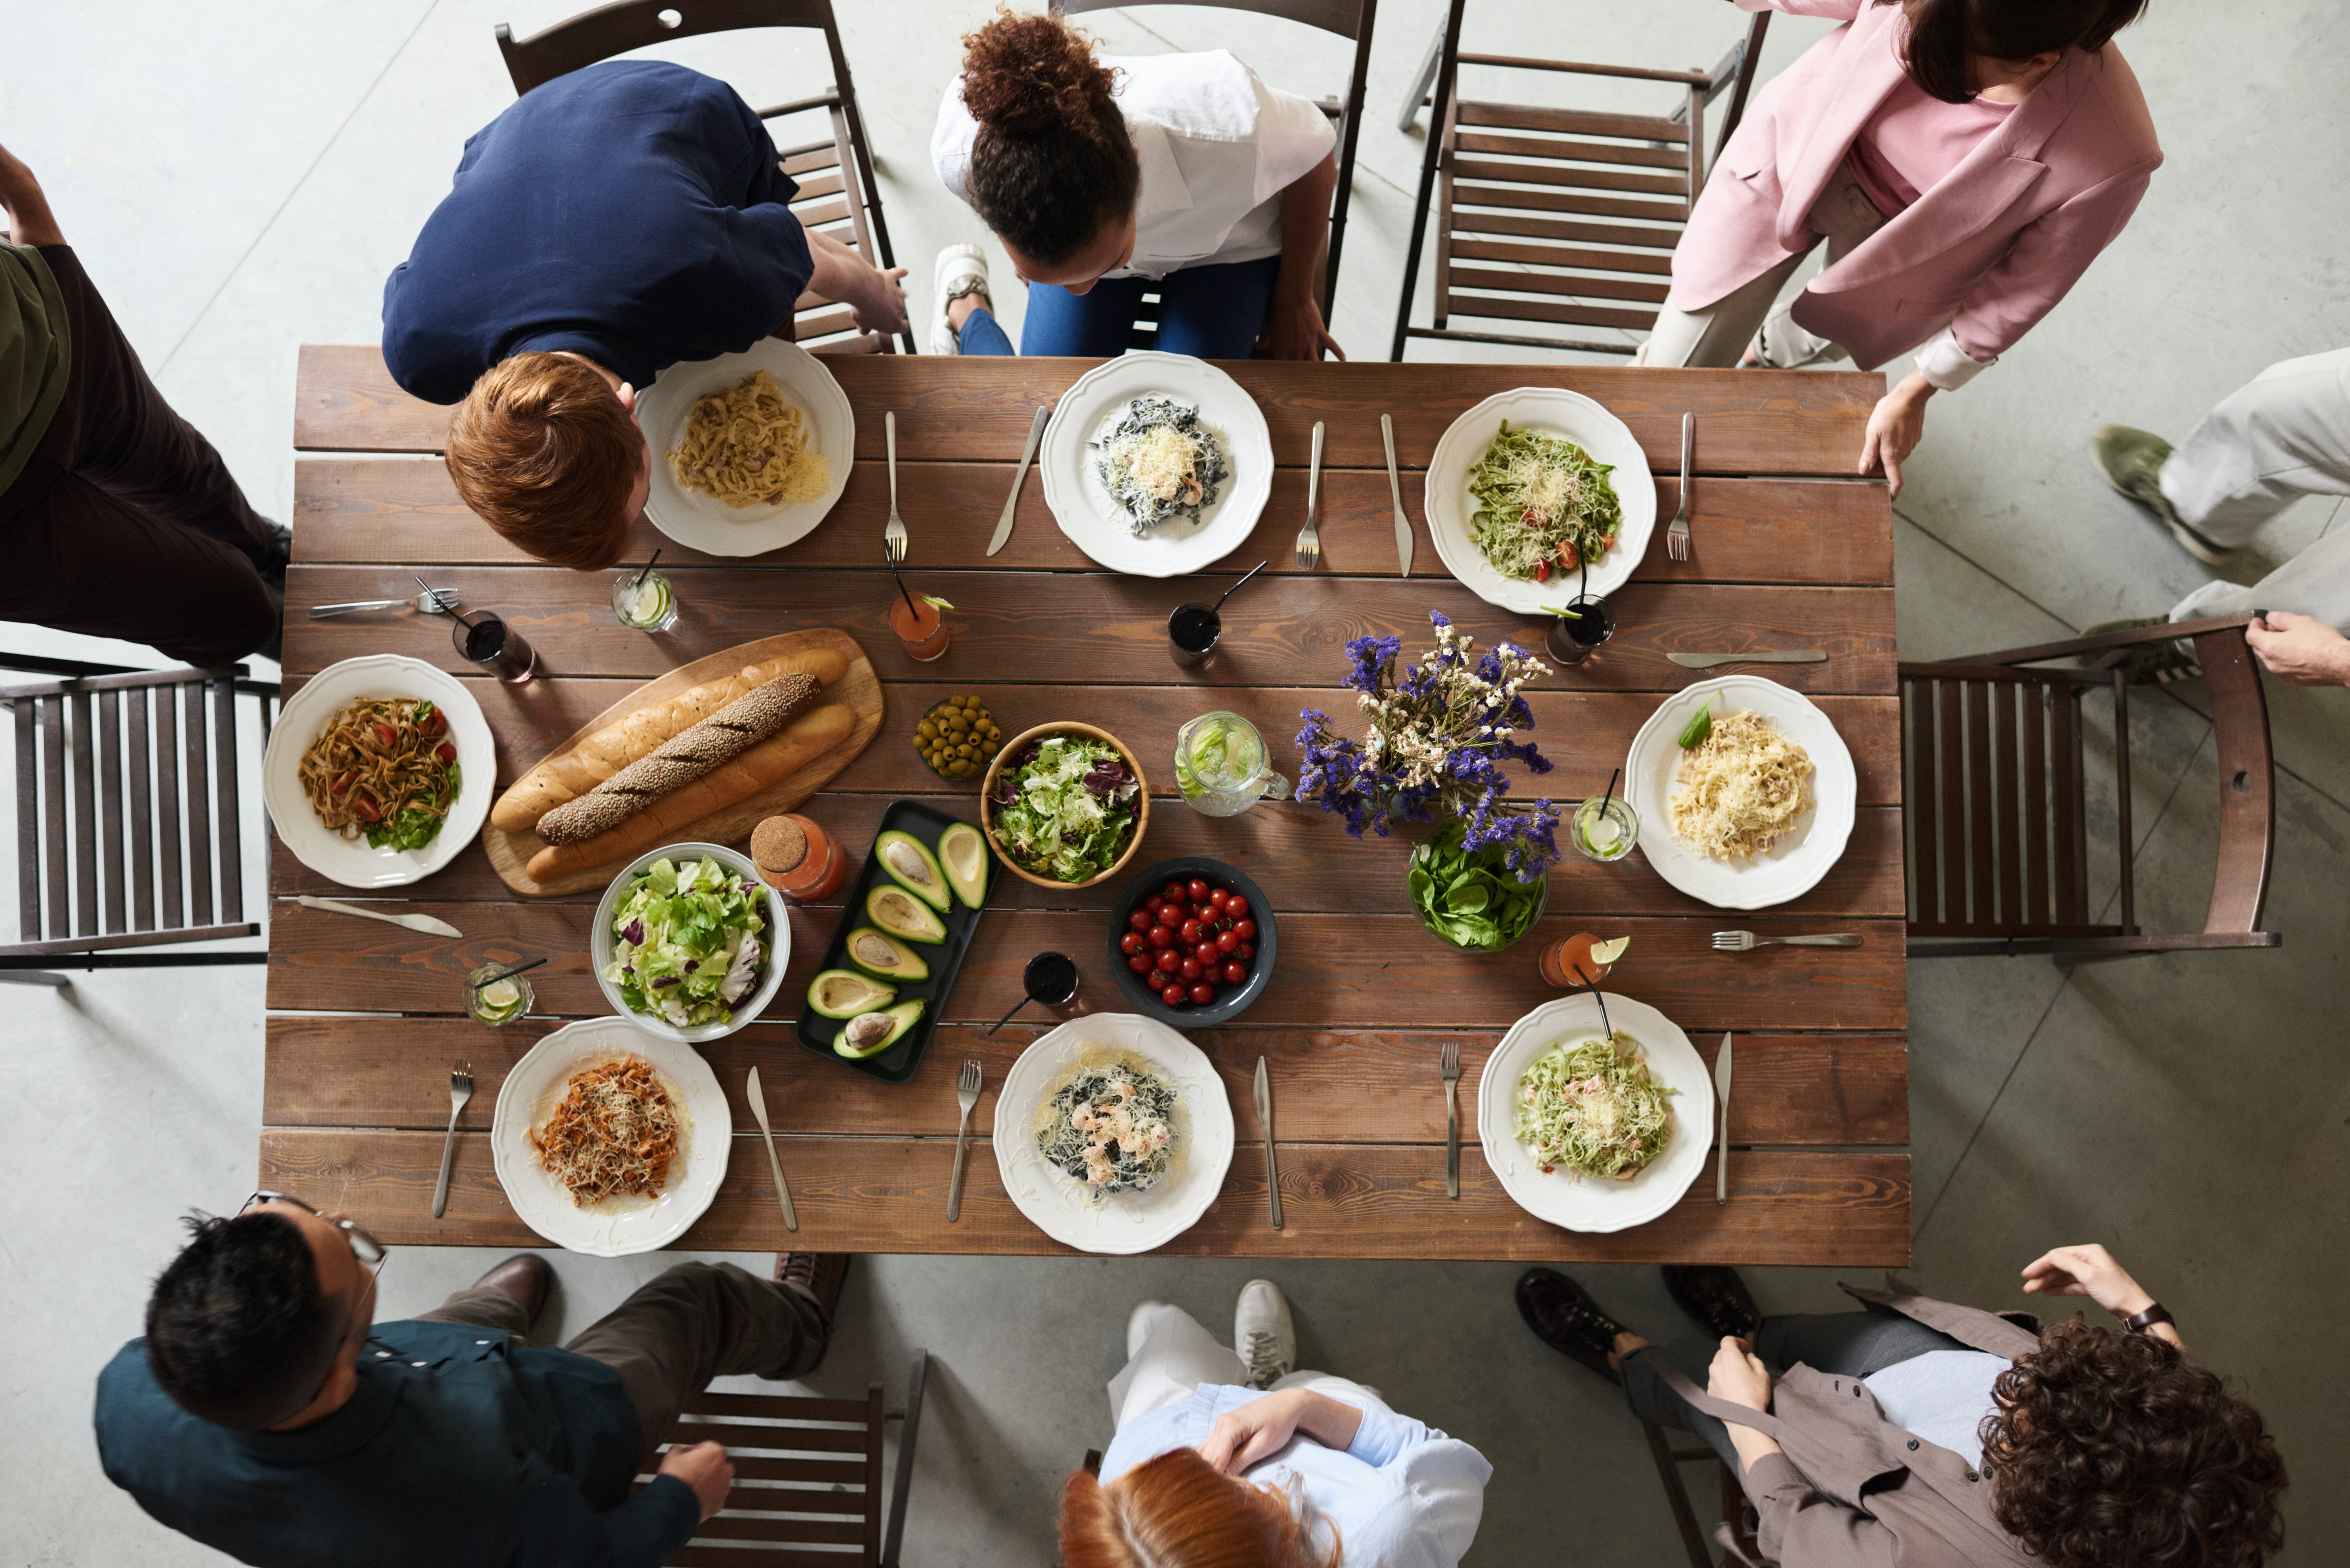 A group of people sitting down to enjoy a meal together | Source: Pexels